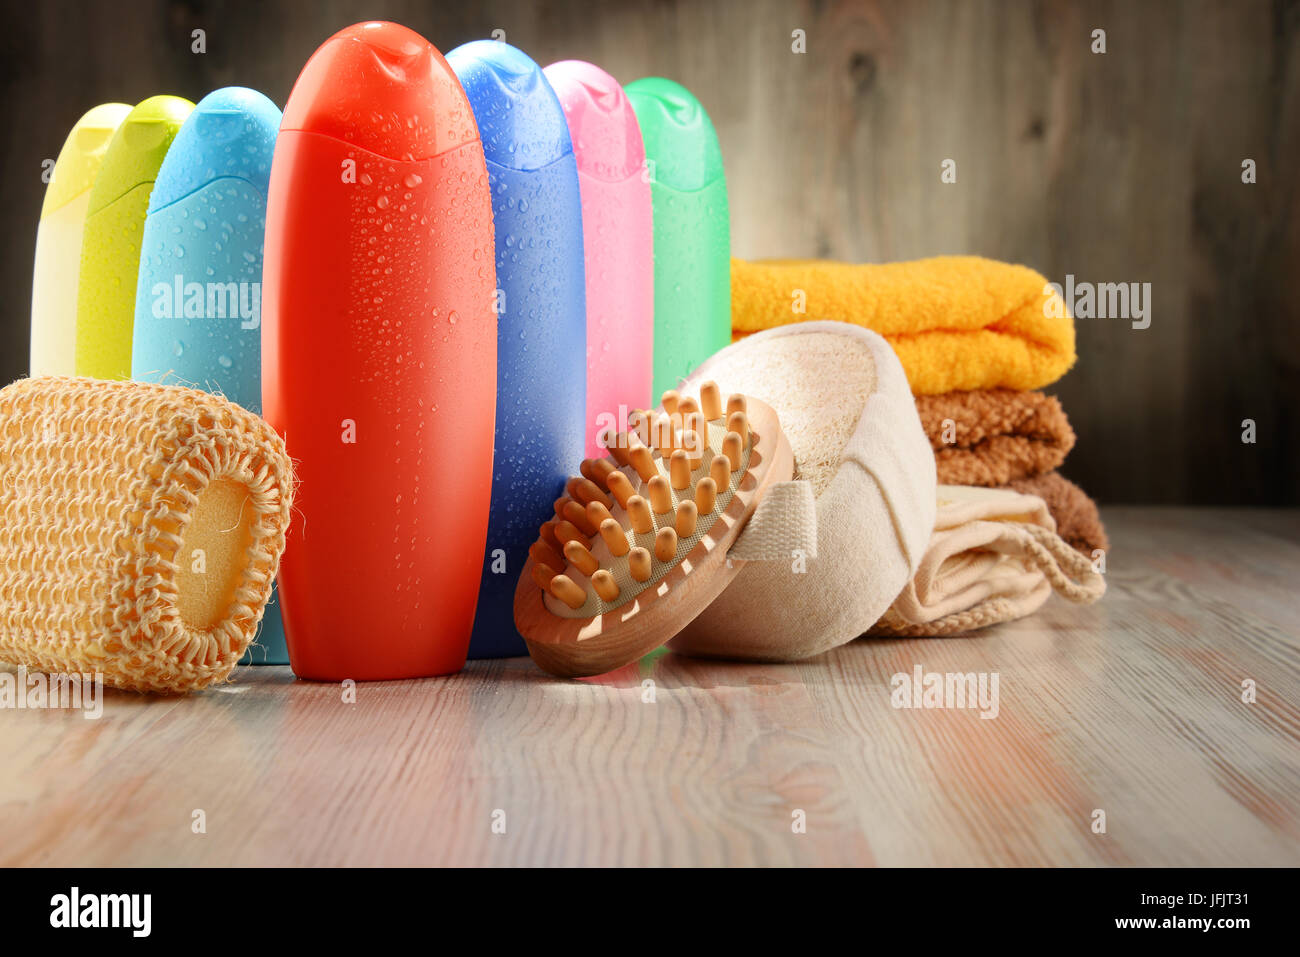 Plastic bottles of body care and beauty products. Stock Photo